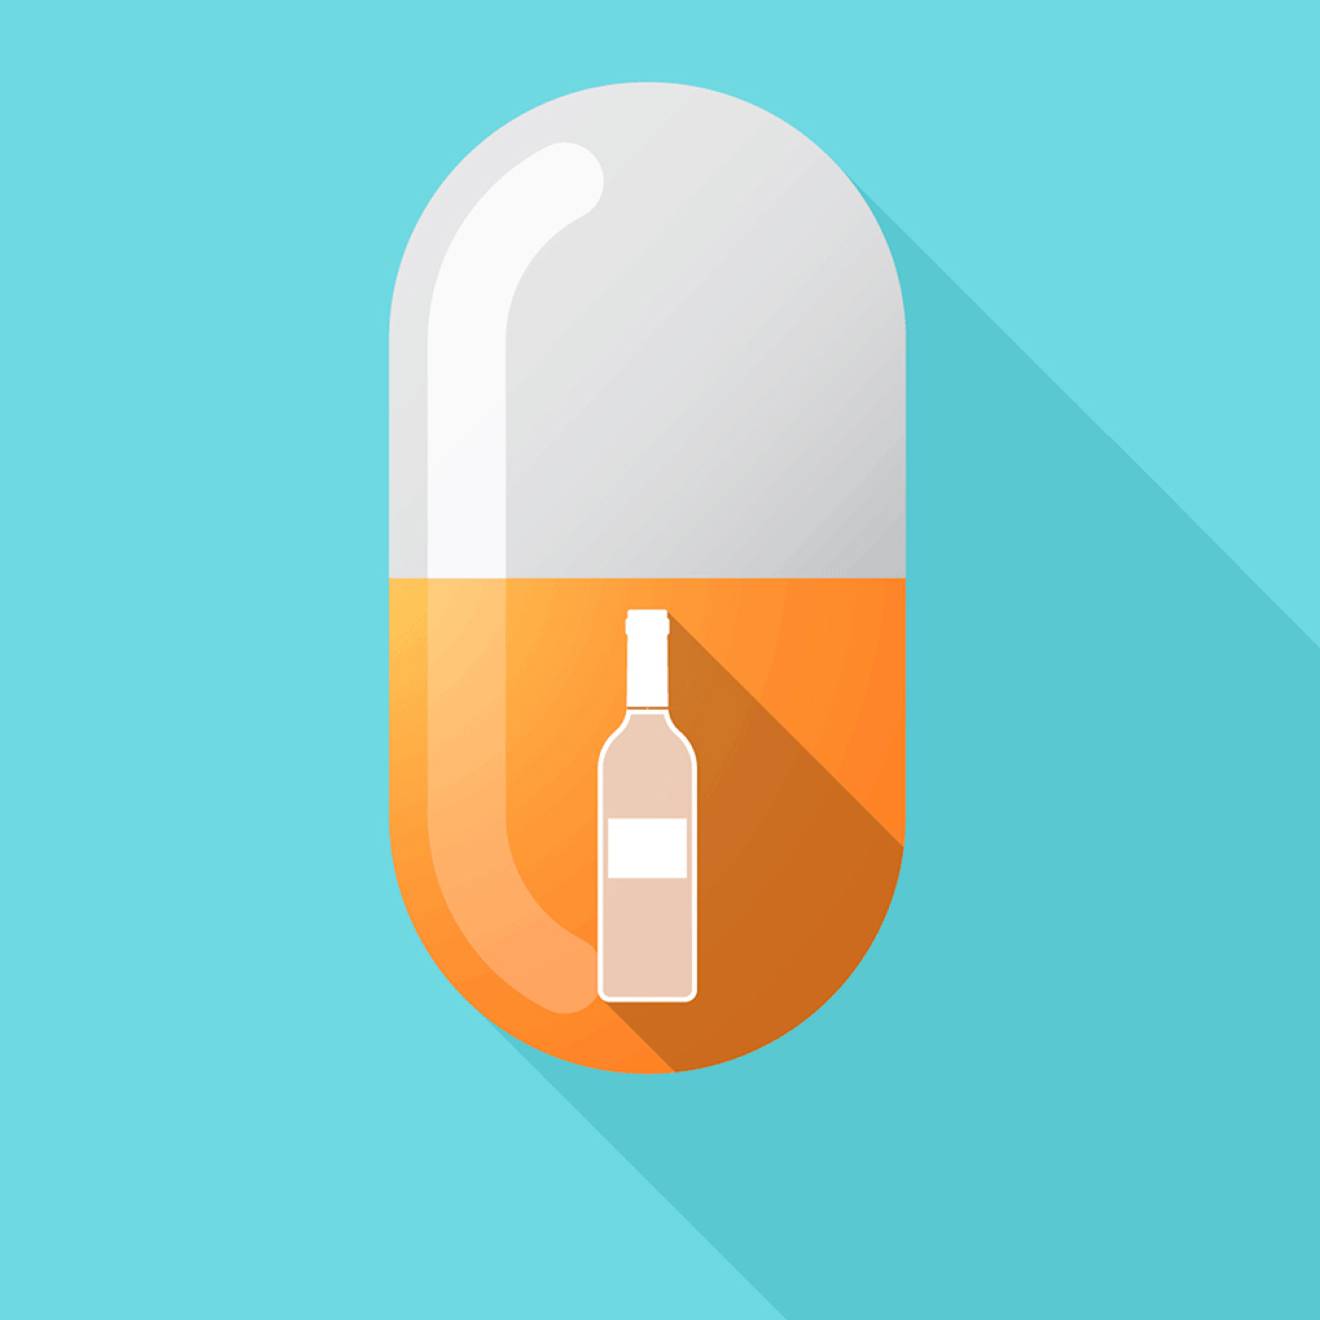 An illustration of an orange and white pill, with a bottle of alcohol inside, on a light teal background